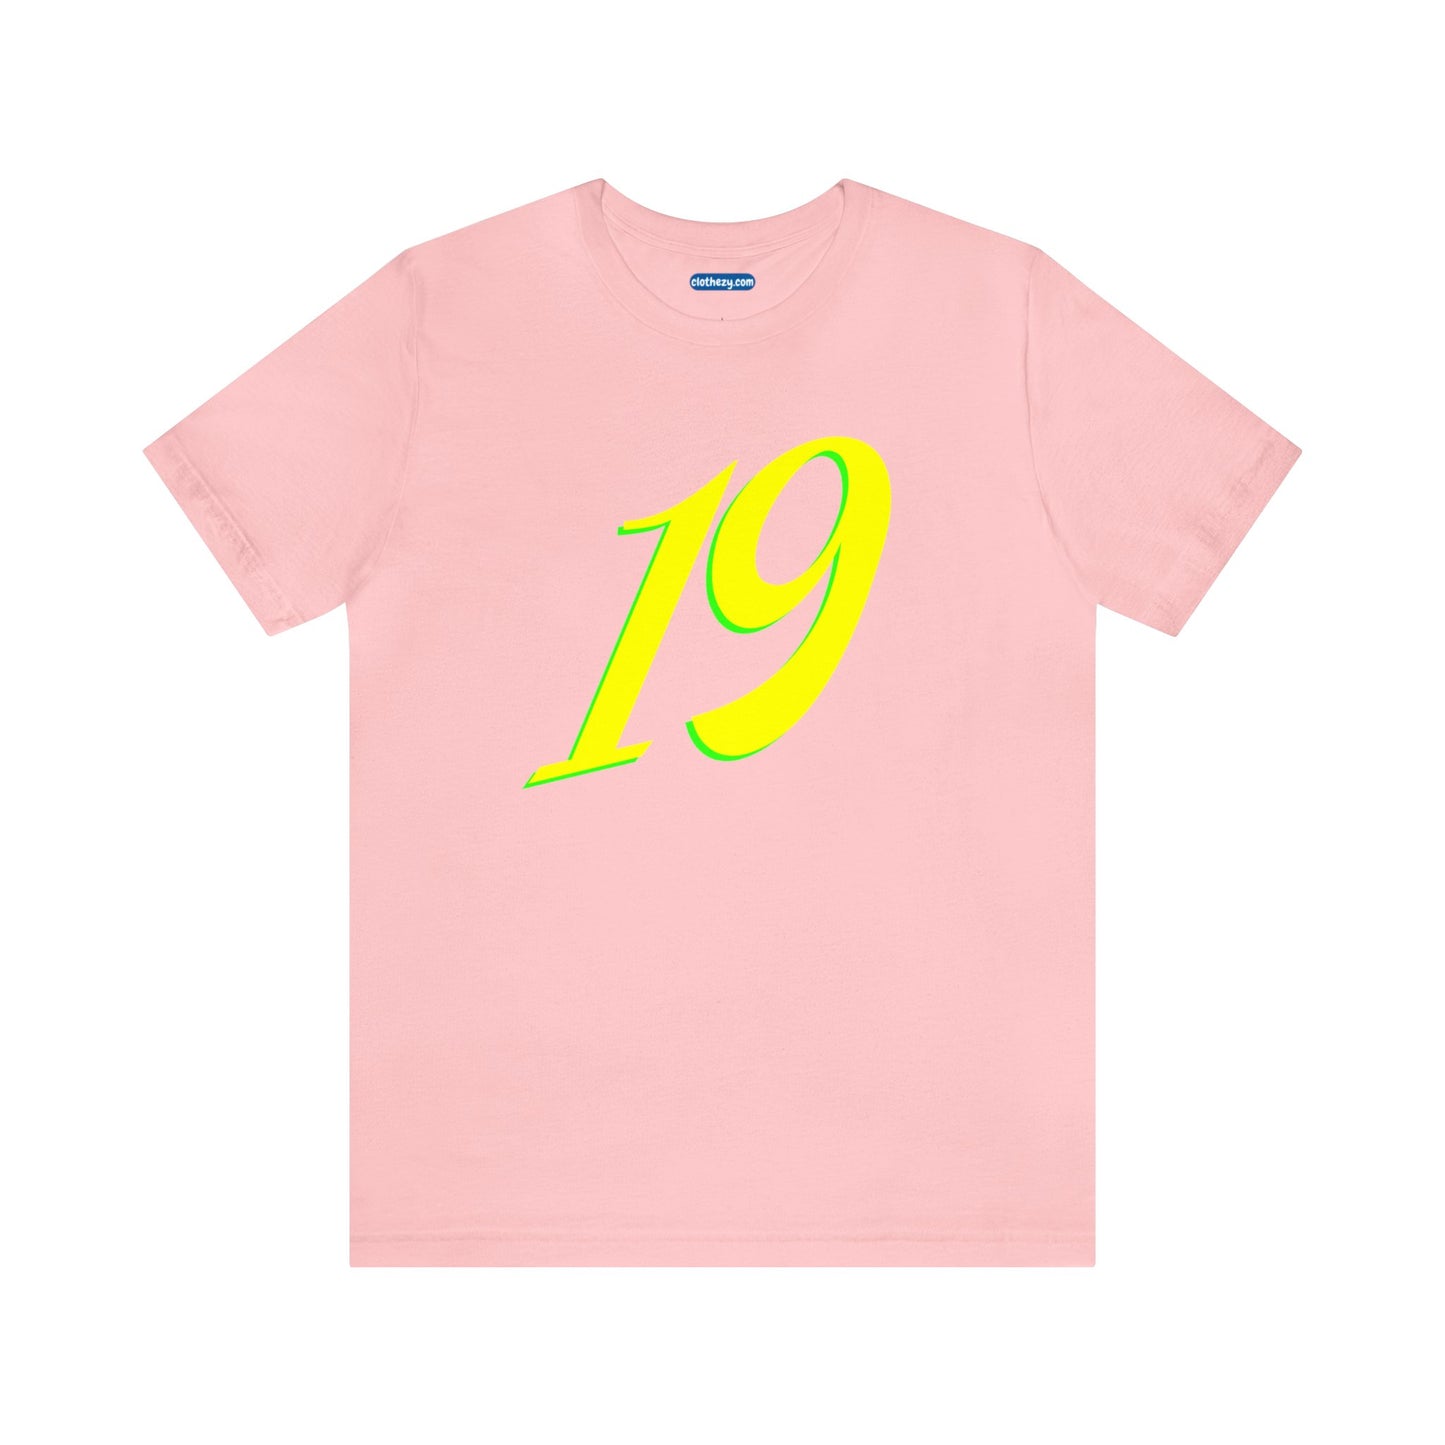 Number 19 Design - Soft Cotton Tee for birthdays and celebrations, Gift for friends and family, Multiple Options by clothezy.com in Red Size Small - Buy Now